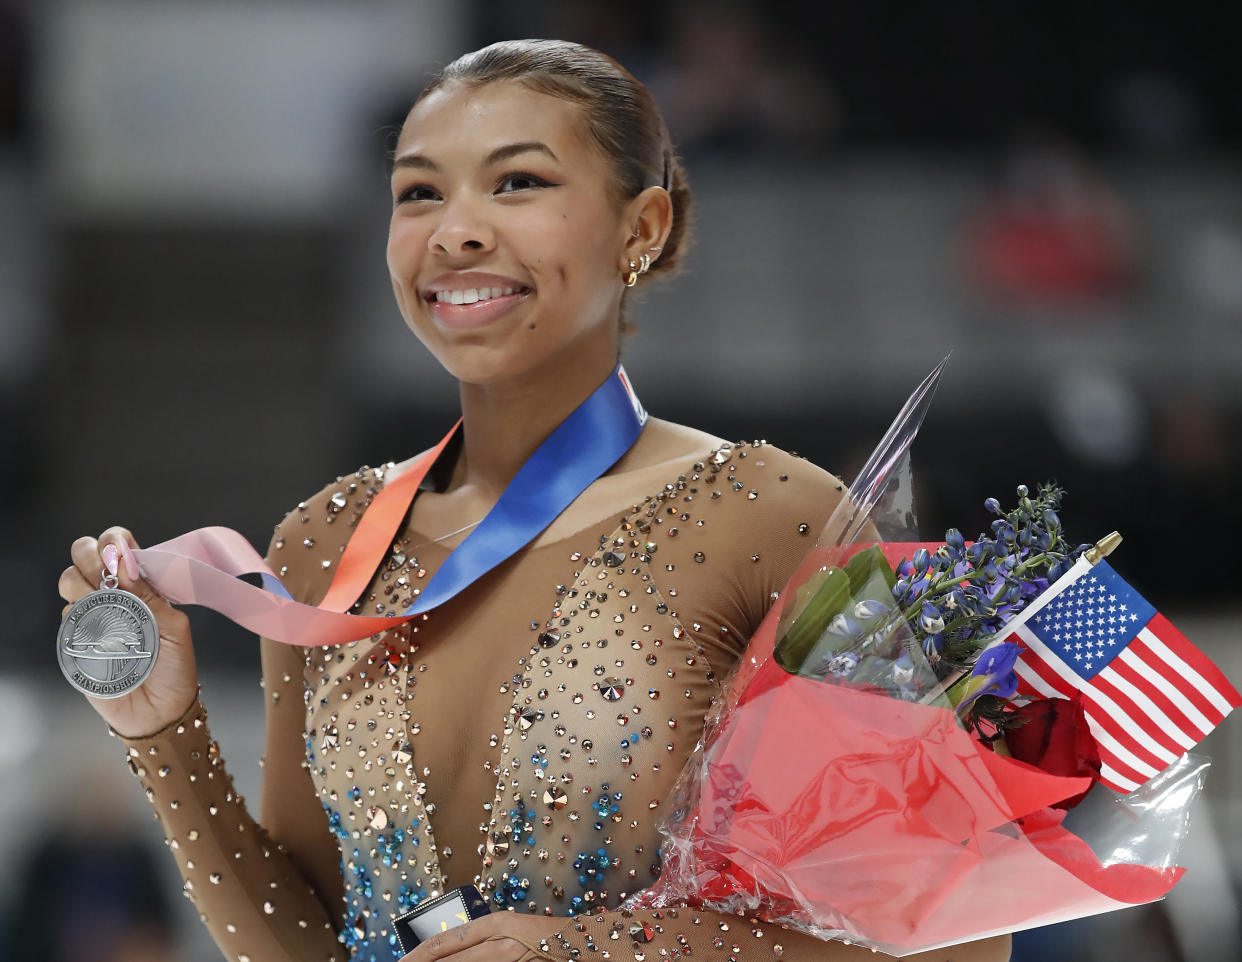 Starr Andrews holds up her medal after the women's free skate at the U.S. figure skating championships in San Jose, Calif., Friday, Jan. 27, 2023. Andrews finished fourth in the event. (AP Photo/Josie Lepe)